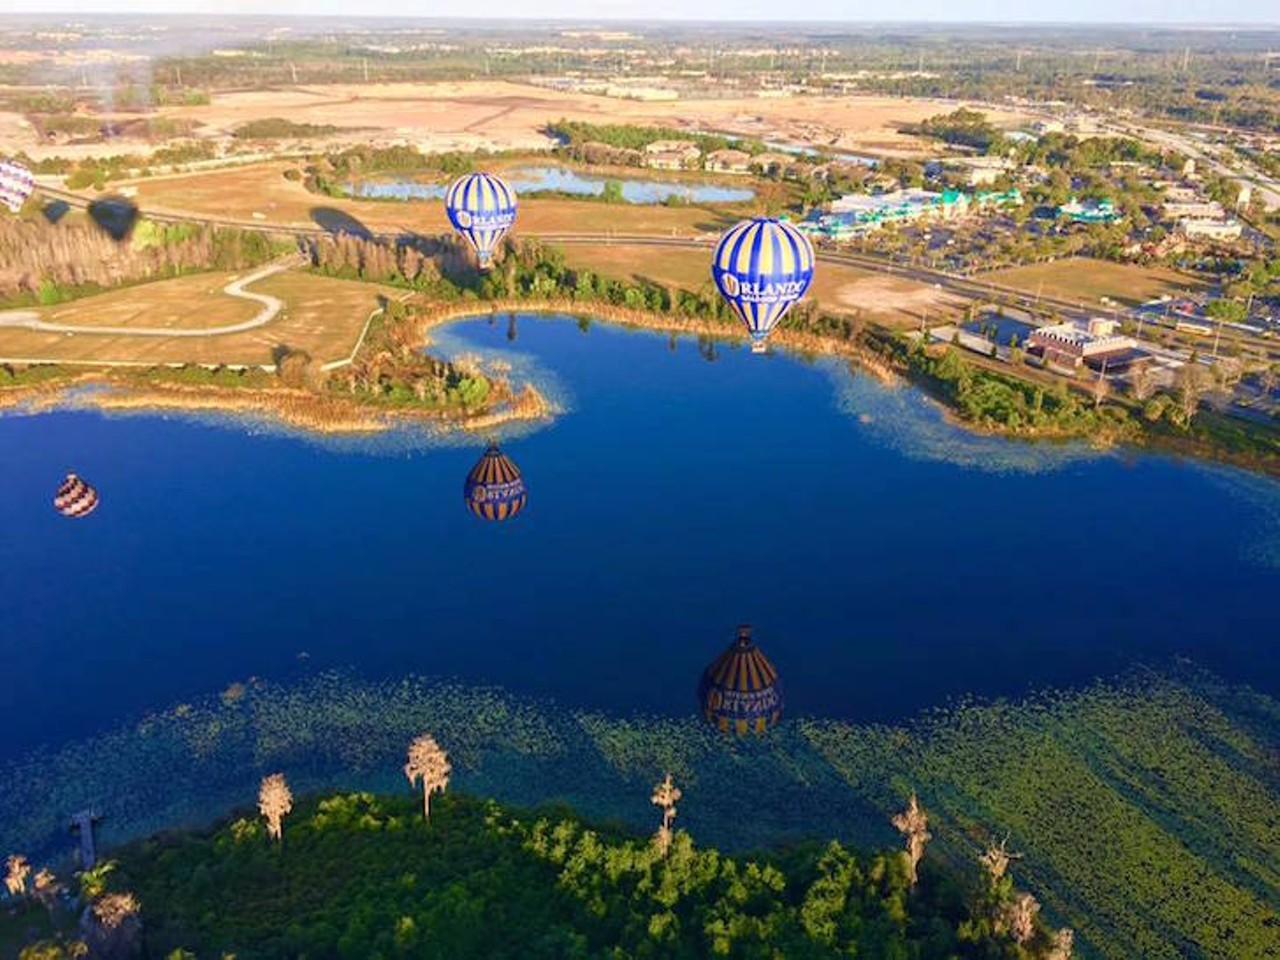 Orlando Balloon Rides
44294 US Highway 27, Davenport| 407-894-5040
This holiday season, beat the view from any roller coaster and take a scenic hot air balloon ride of the The City Beautiful from $69 for kids and $165 for adults.
Photo via Orlando Balloon Rides/Facebook